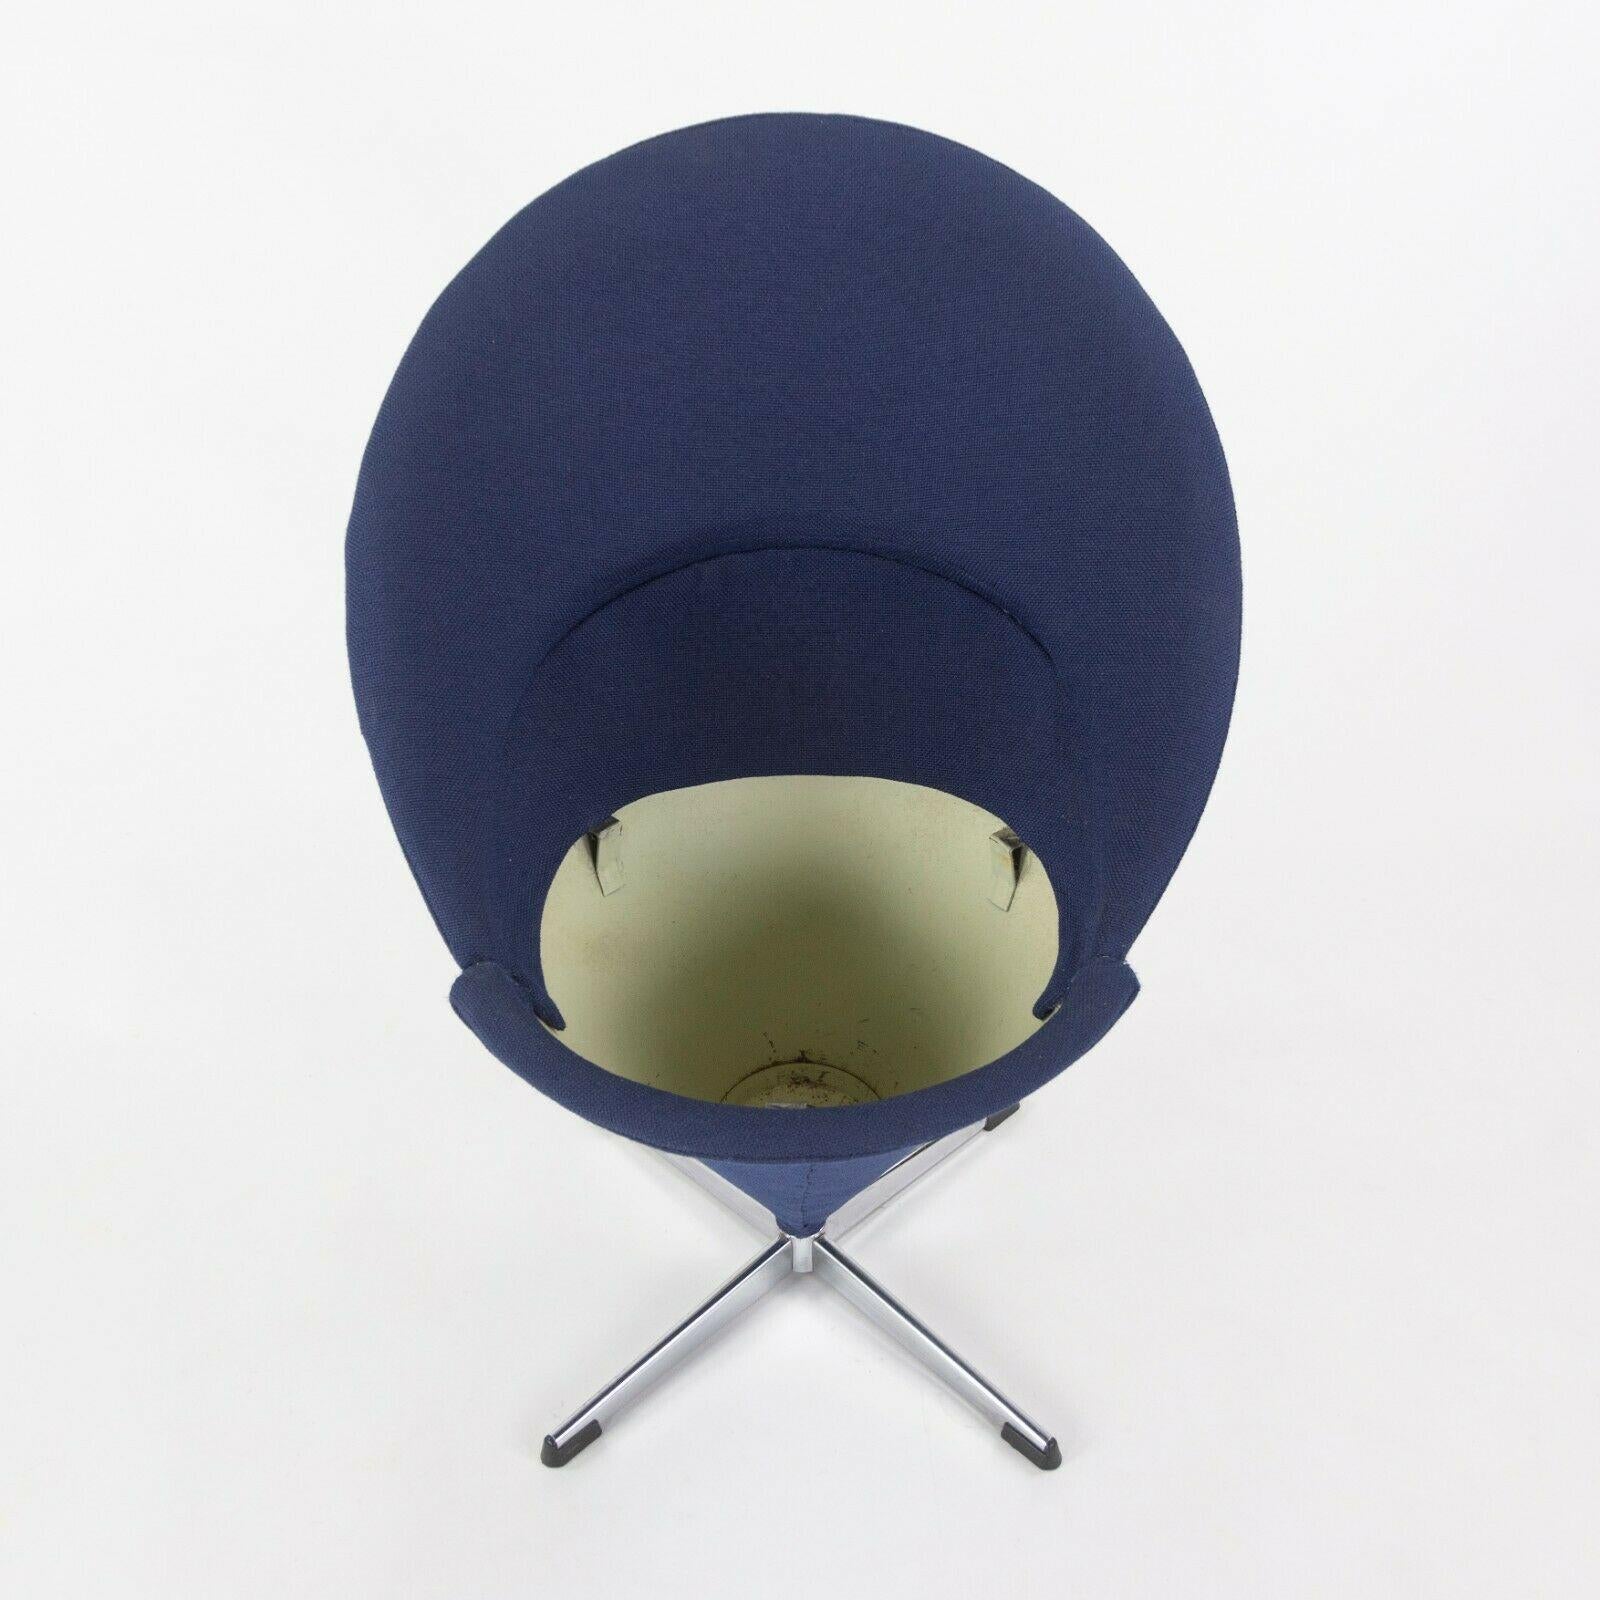 1960s Verner Panton Cone Chair Blue Fabric Made in Denmark for Plus-Linje Vitra 4